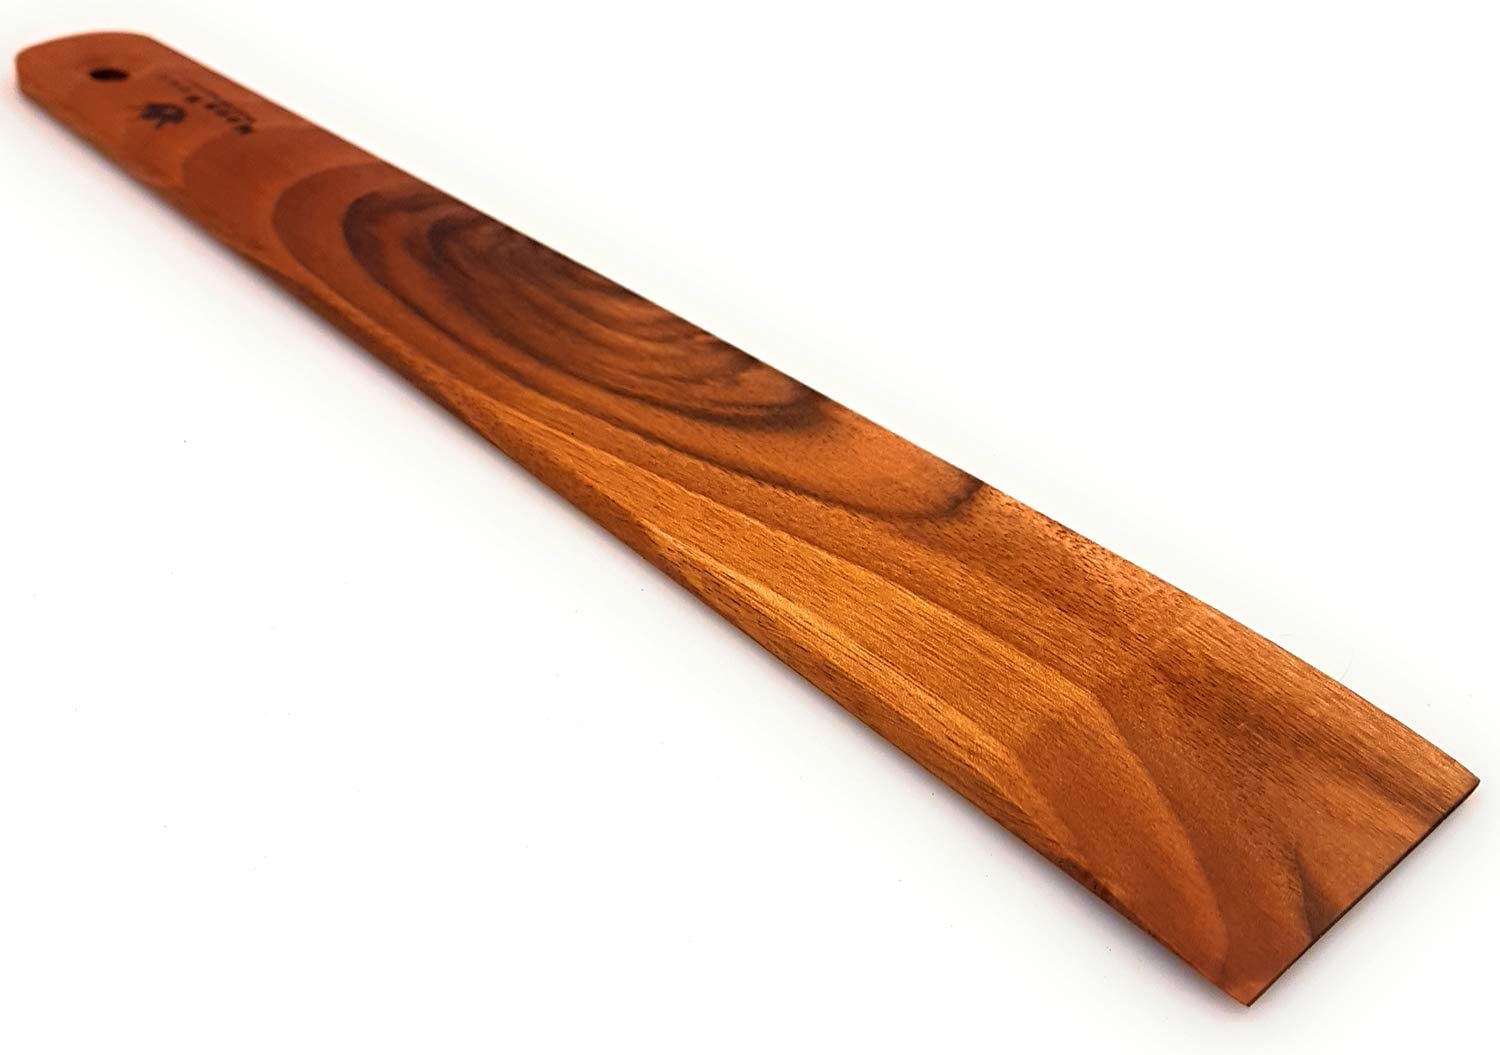 Wooden Spurtle is great for cast iron cookware